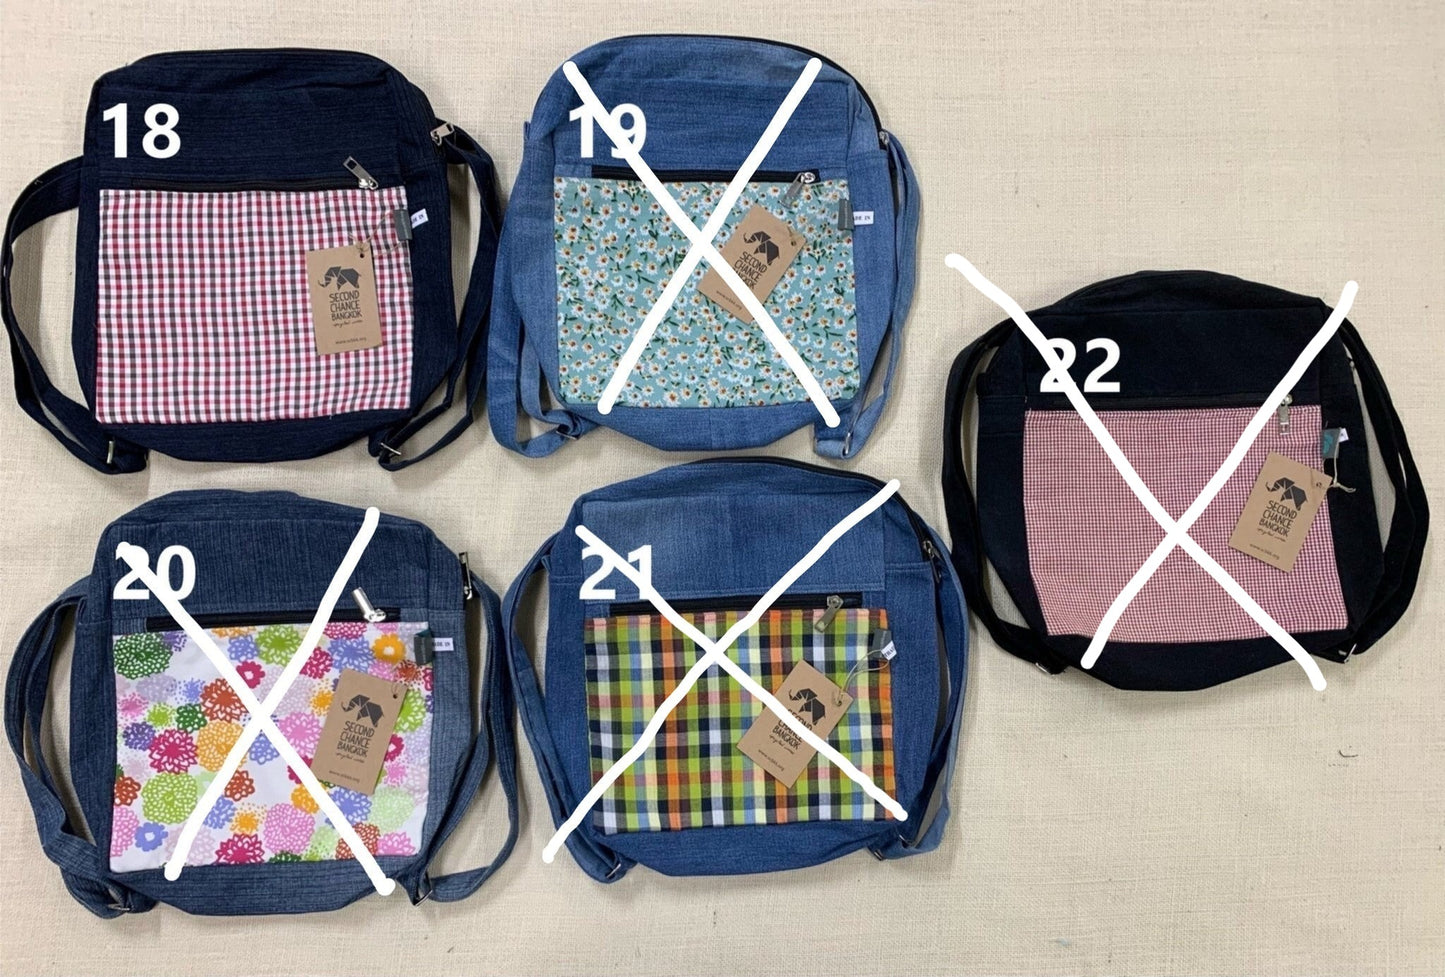 Kids Backpack Second Chance